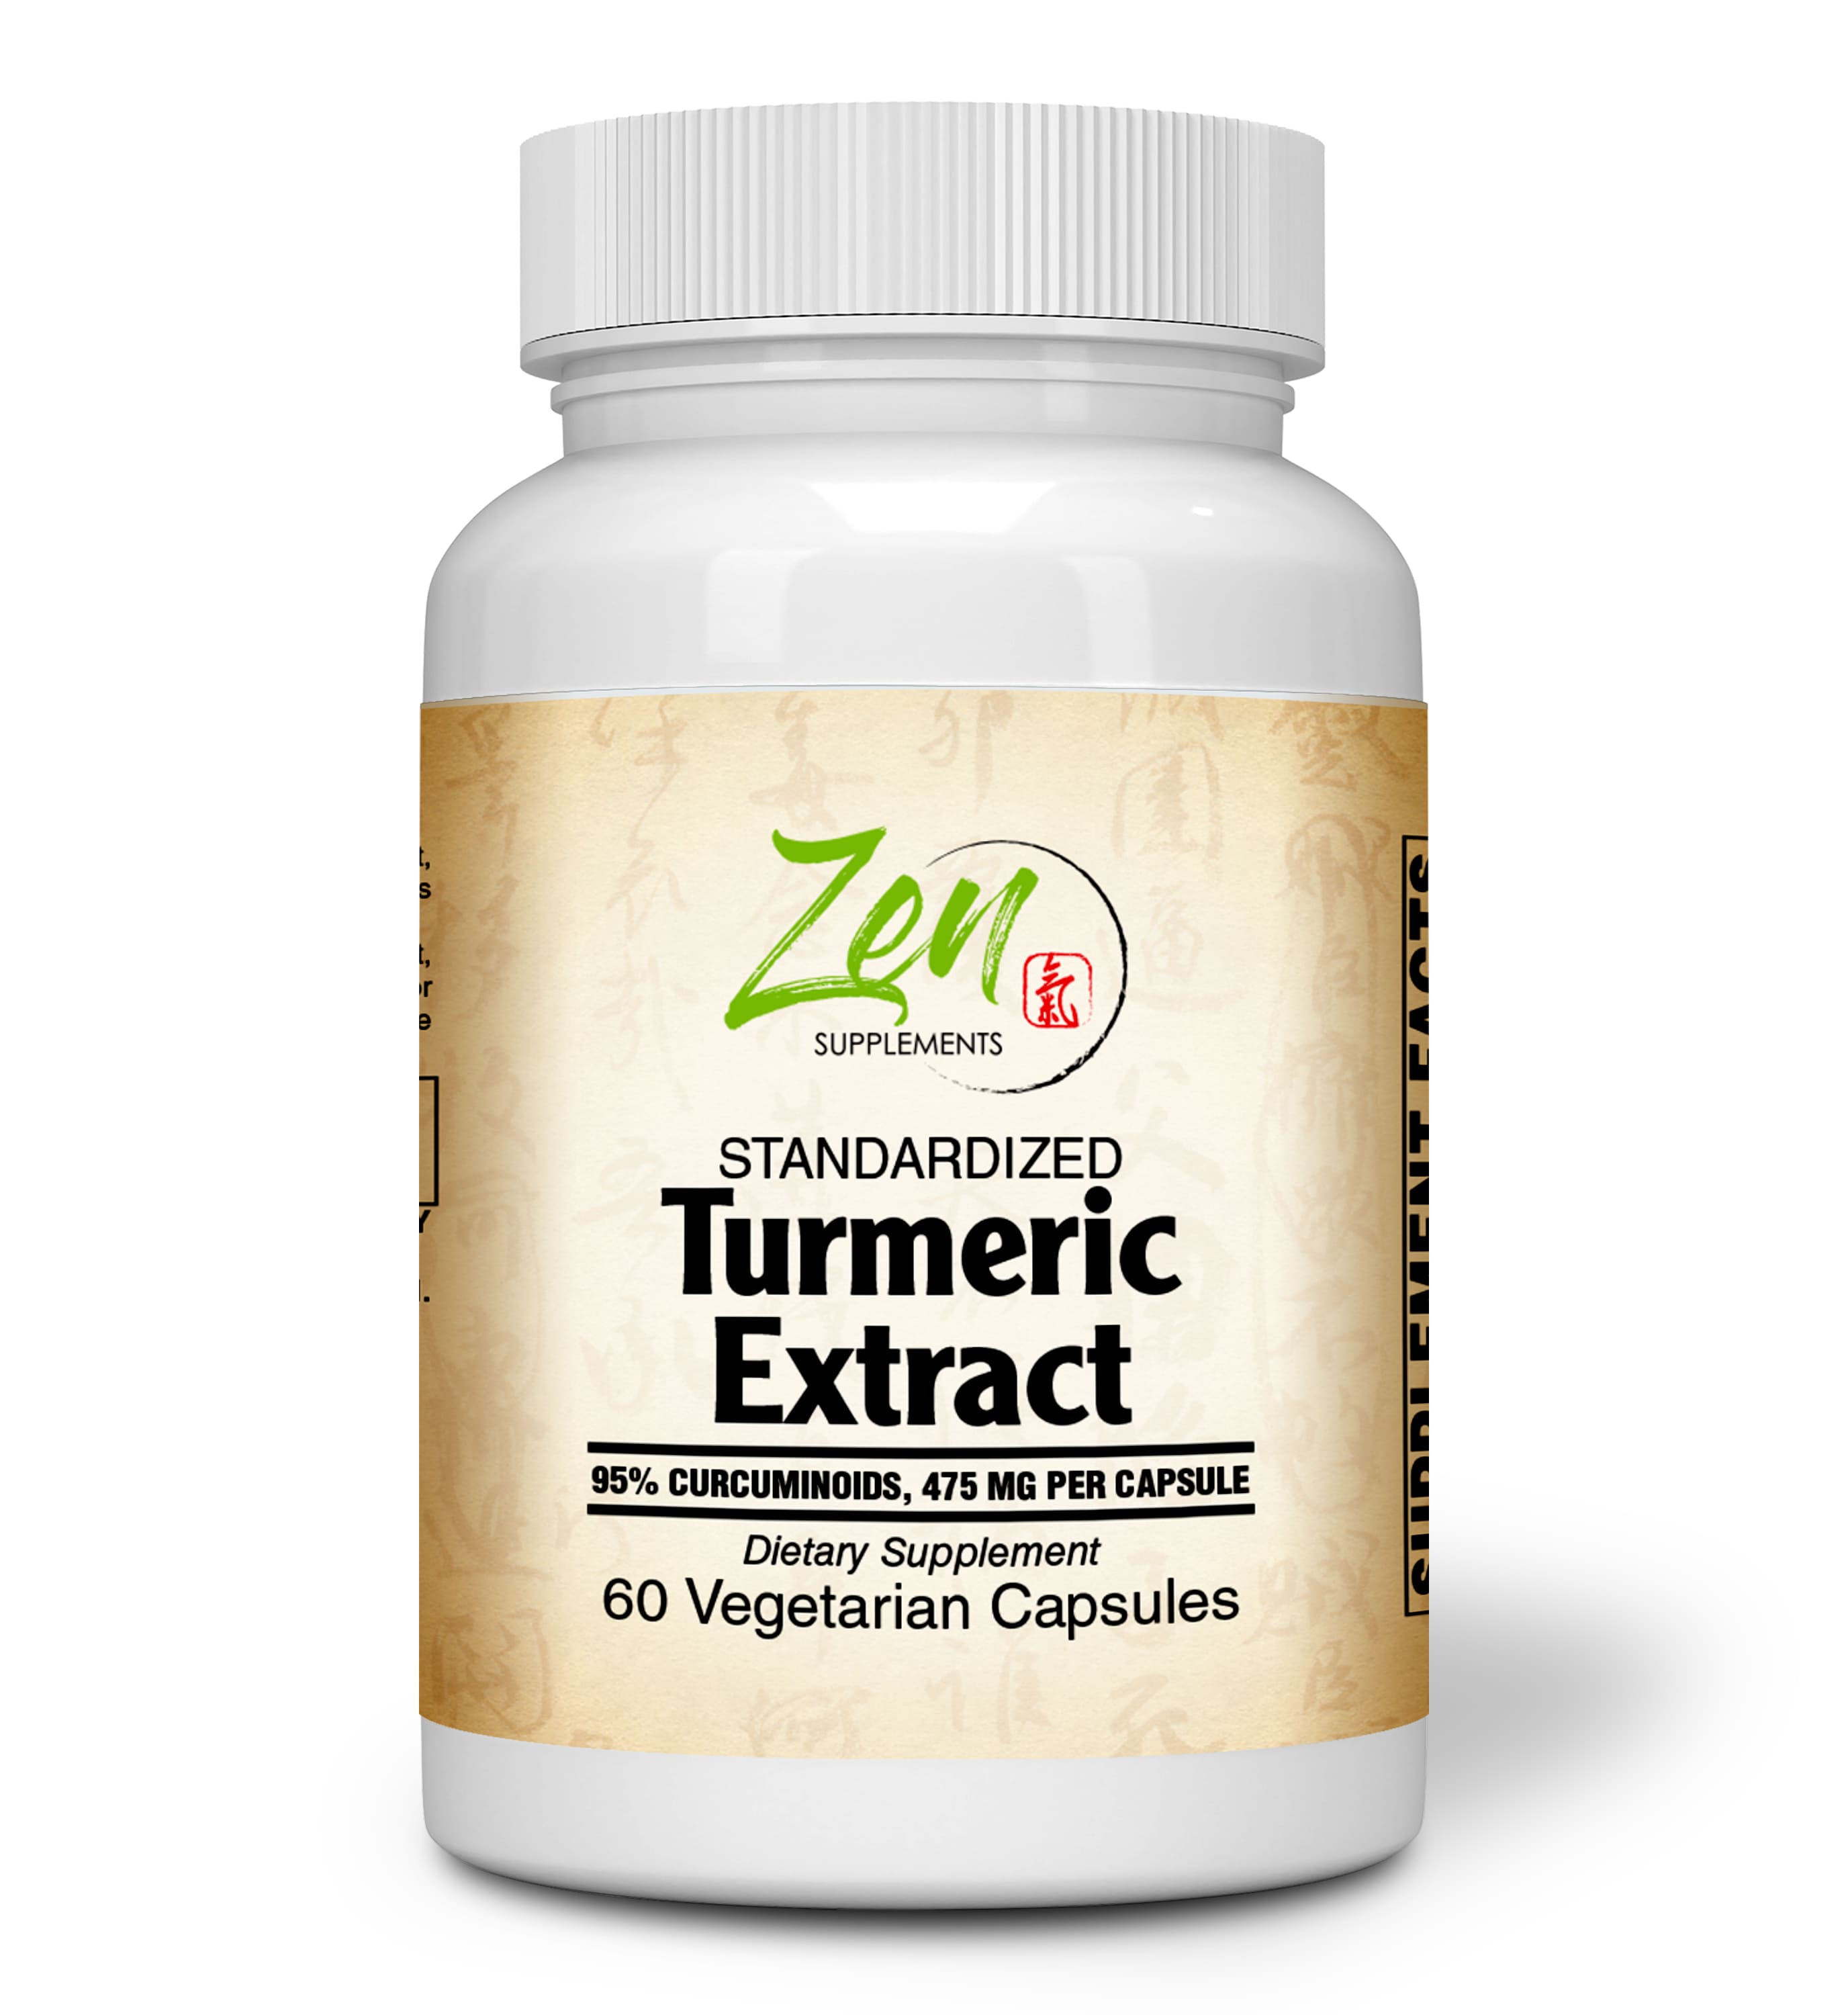 Zen Supplements - Turmeric Extract 500 Mg Features Curcumin C3 Complex? The Most Active Form of Curcuminoid Found in The Turmeric Root - Promotes Joint, Heart, Brain Health Plus Immune Response 60-Vegcaps